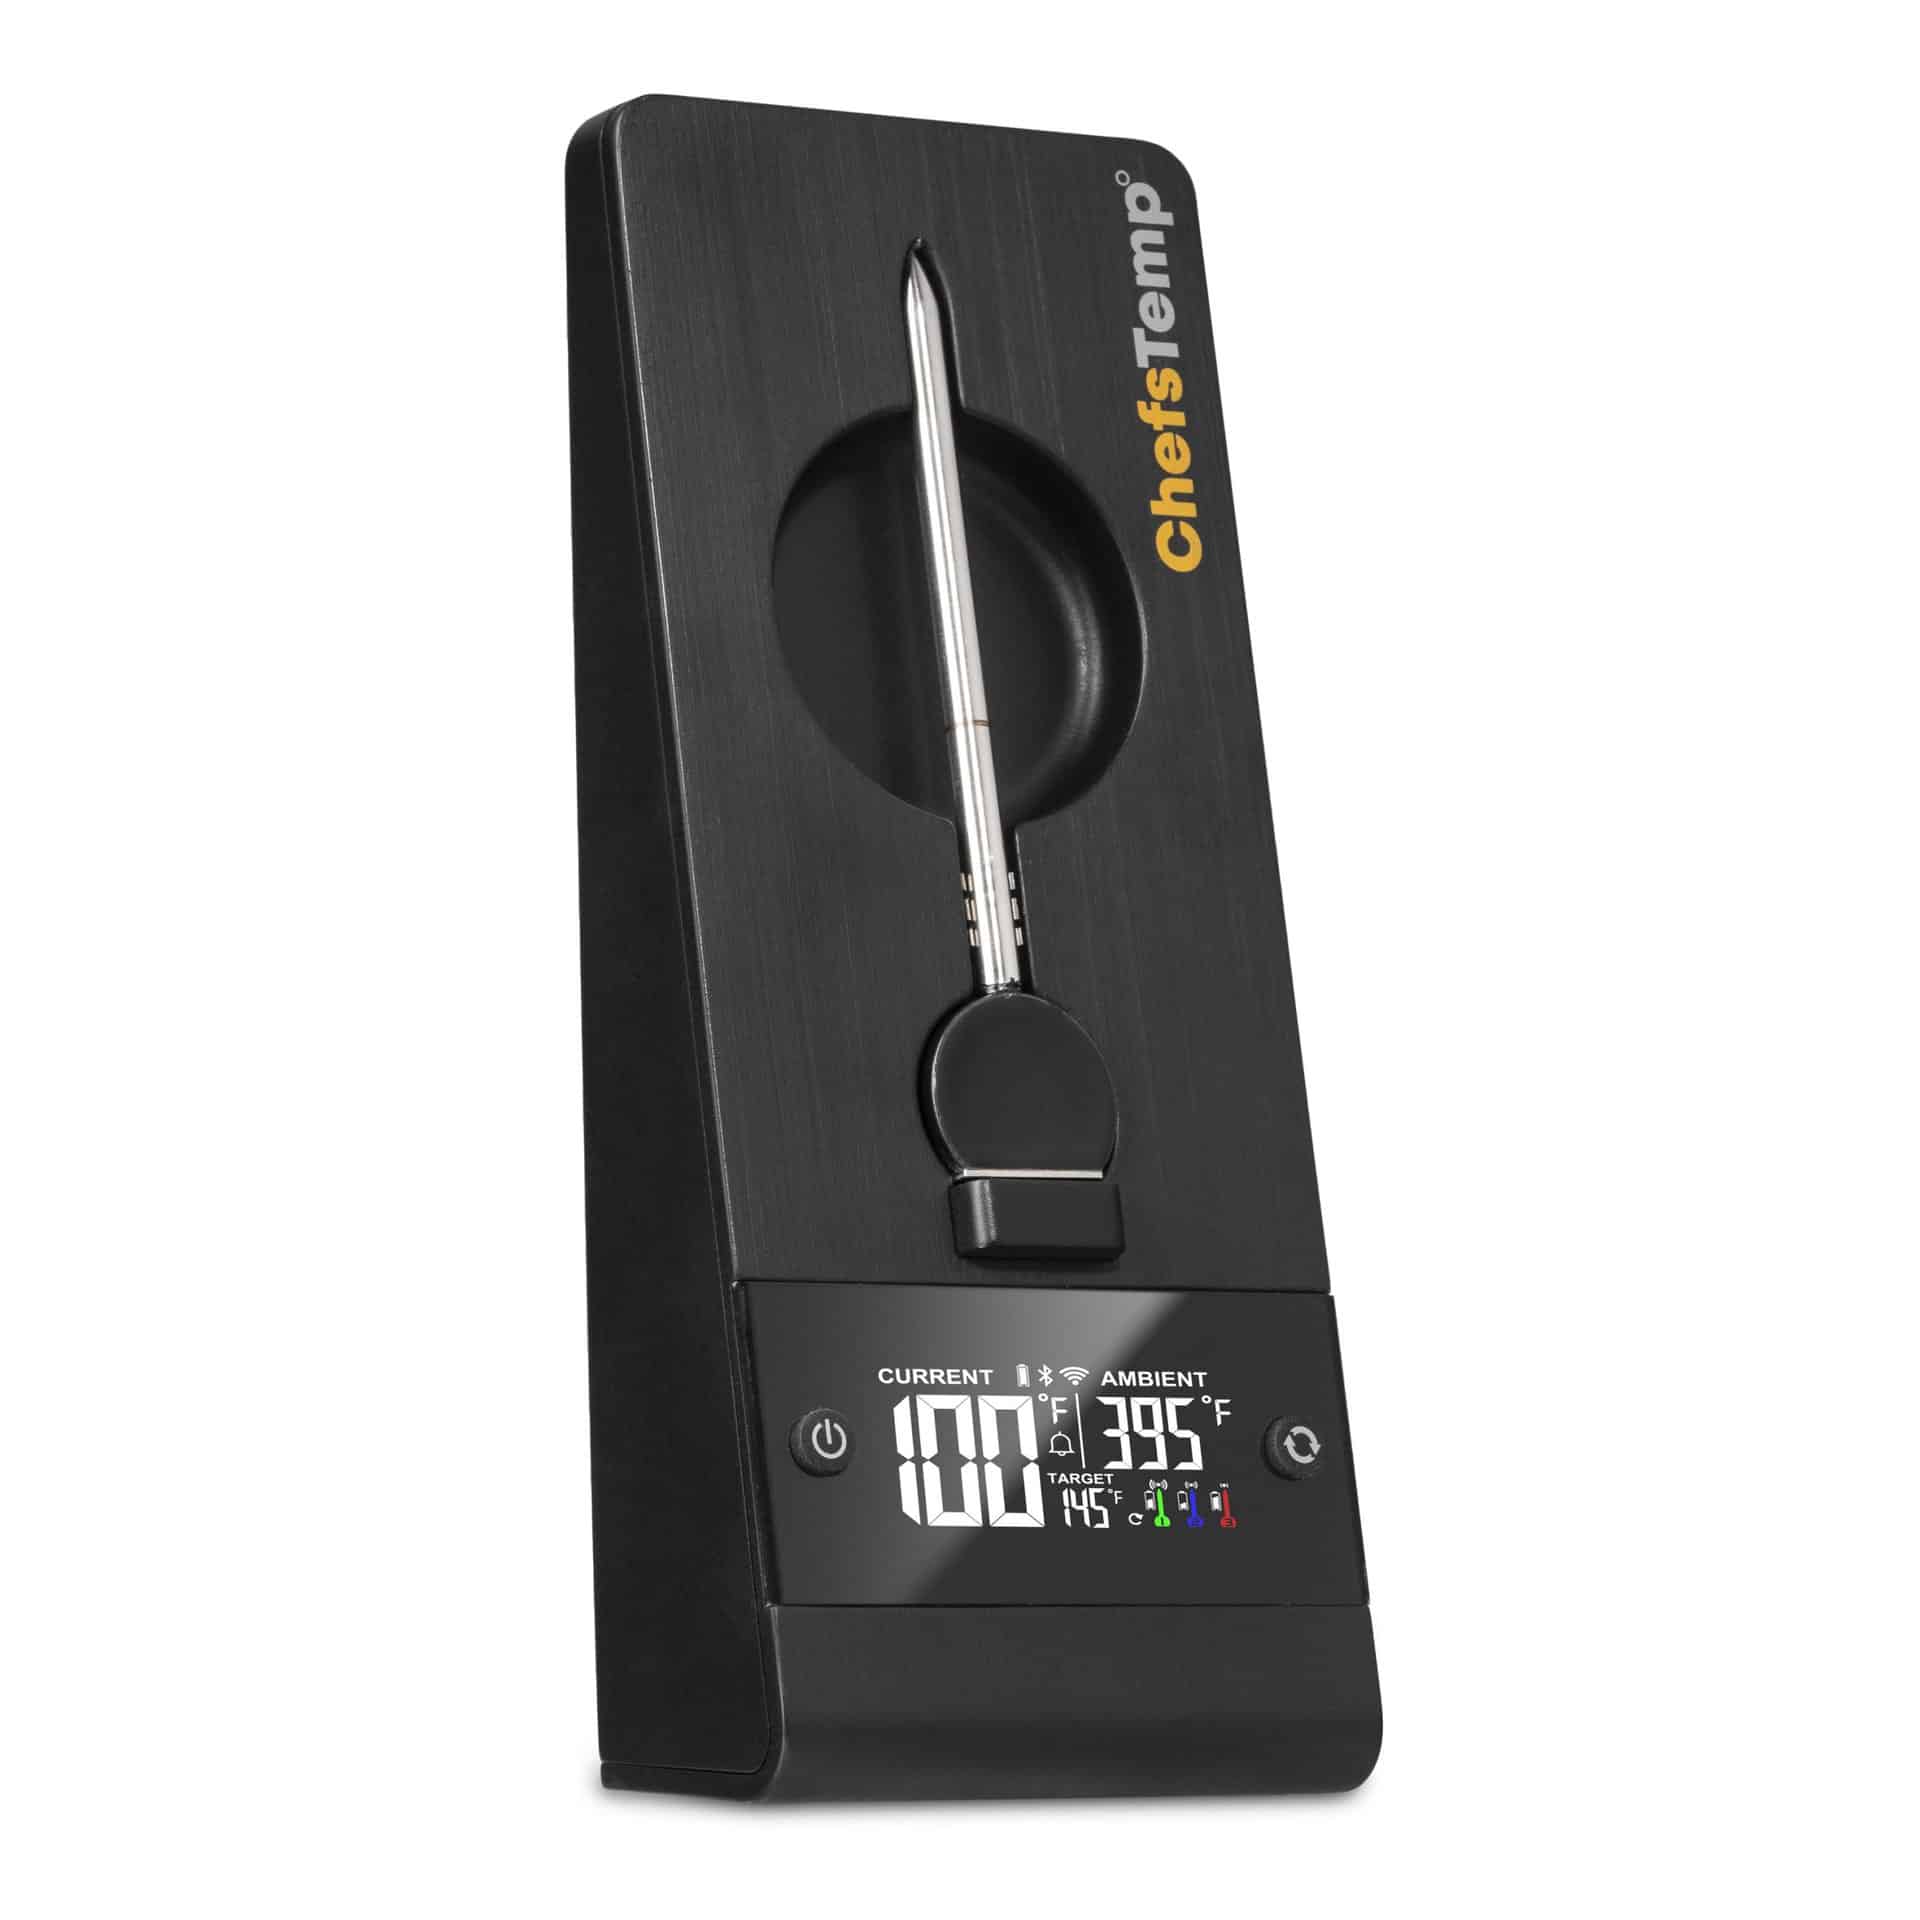 ChefsTemp ProTemp Plus Wireless Meat Thermometer Wi-Fi and